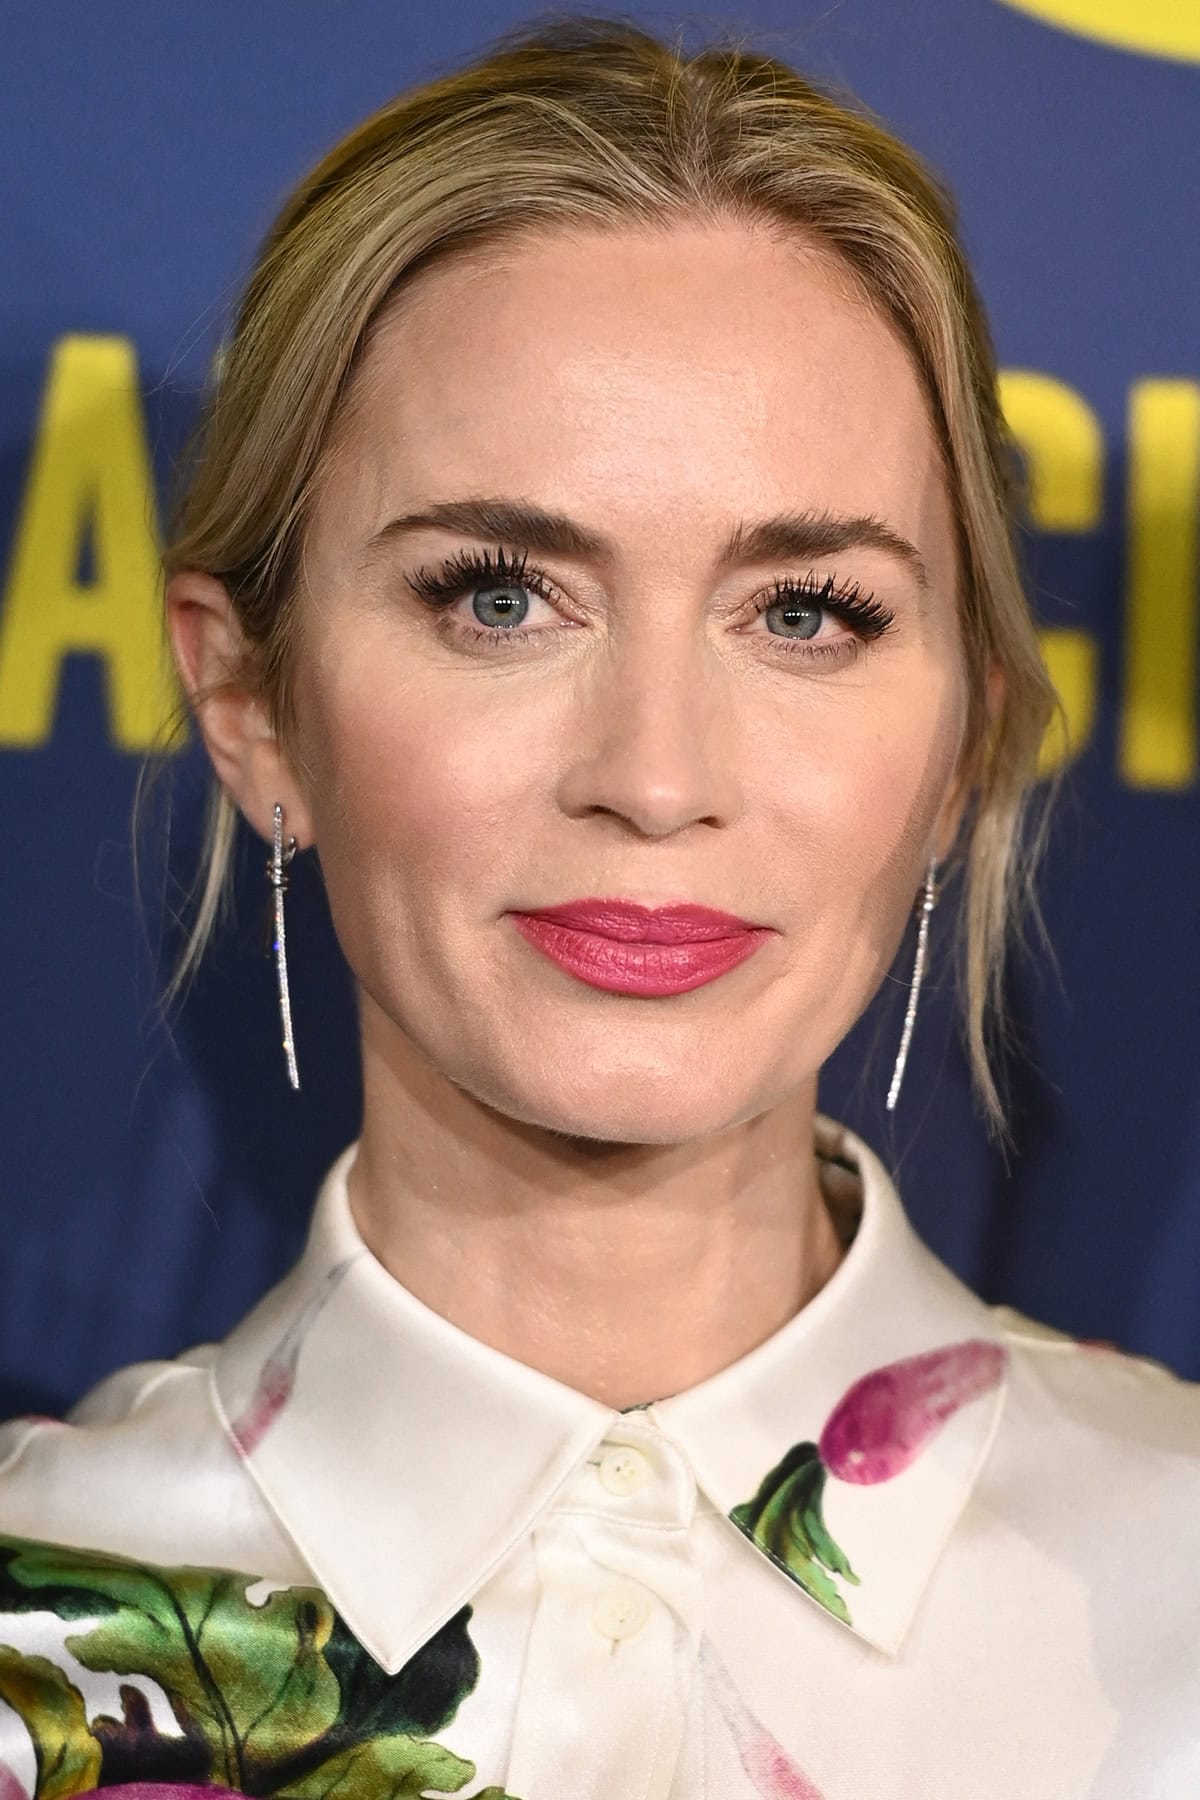 Emily Blunt wears a casual updo and coordinates her outfit with her glam by wearing fuchsia pink lipstick and blush